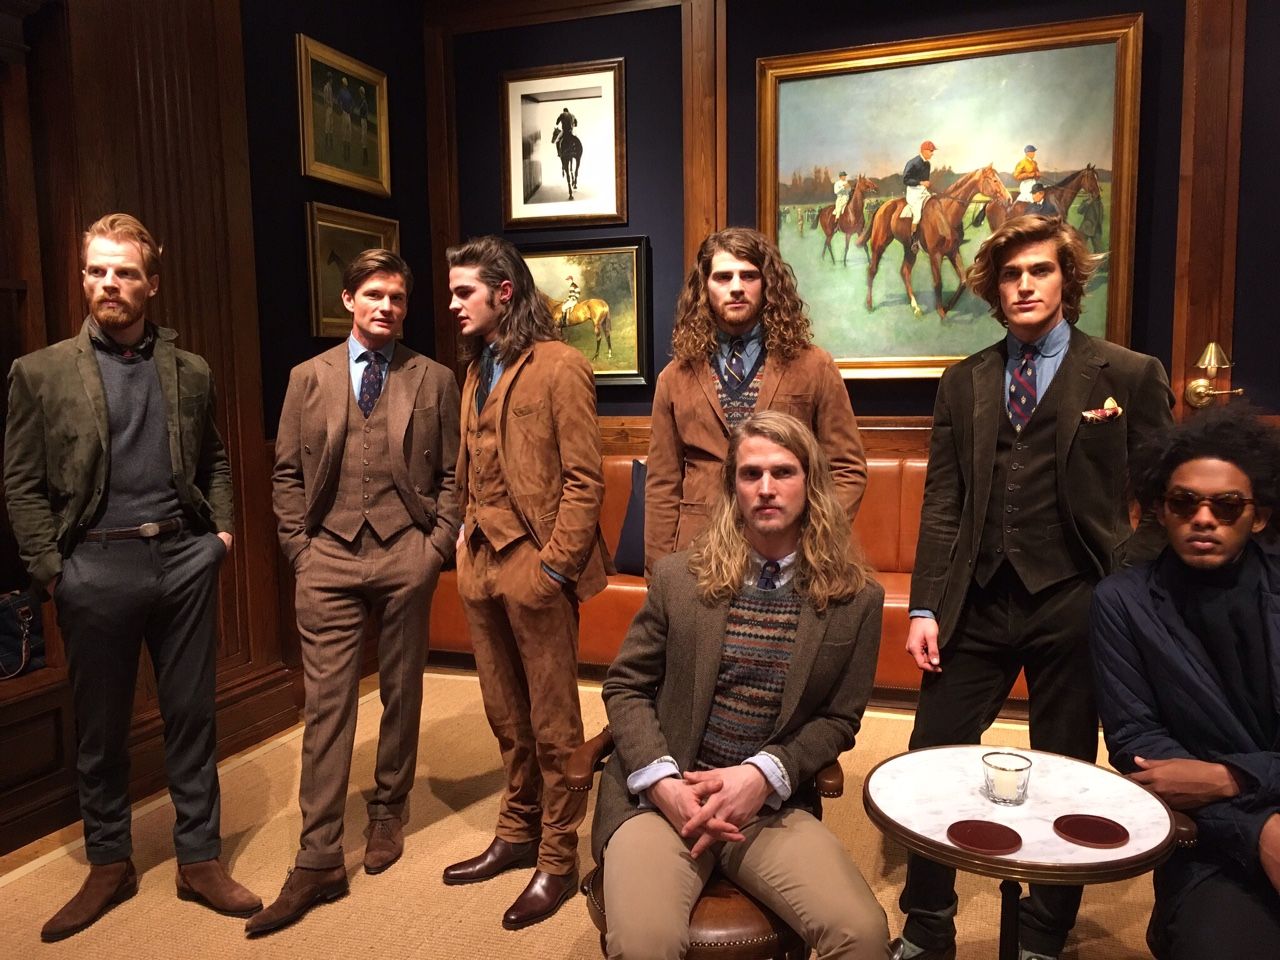 Polo Ralph Lauren's Latest Collection Has Us Dreaming of Fall